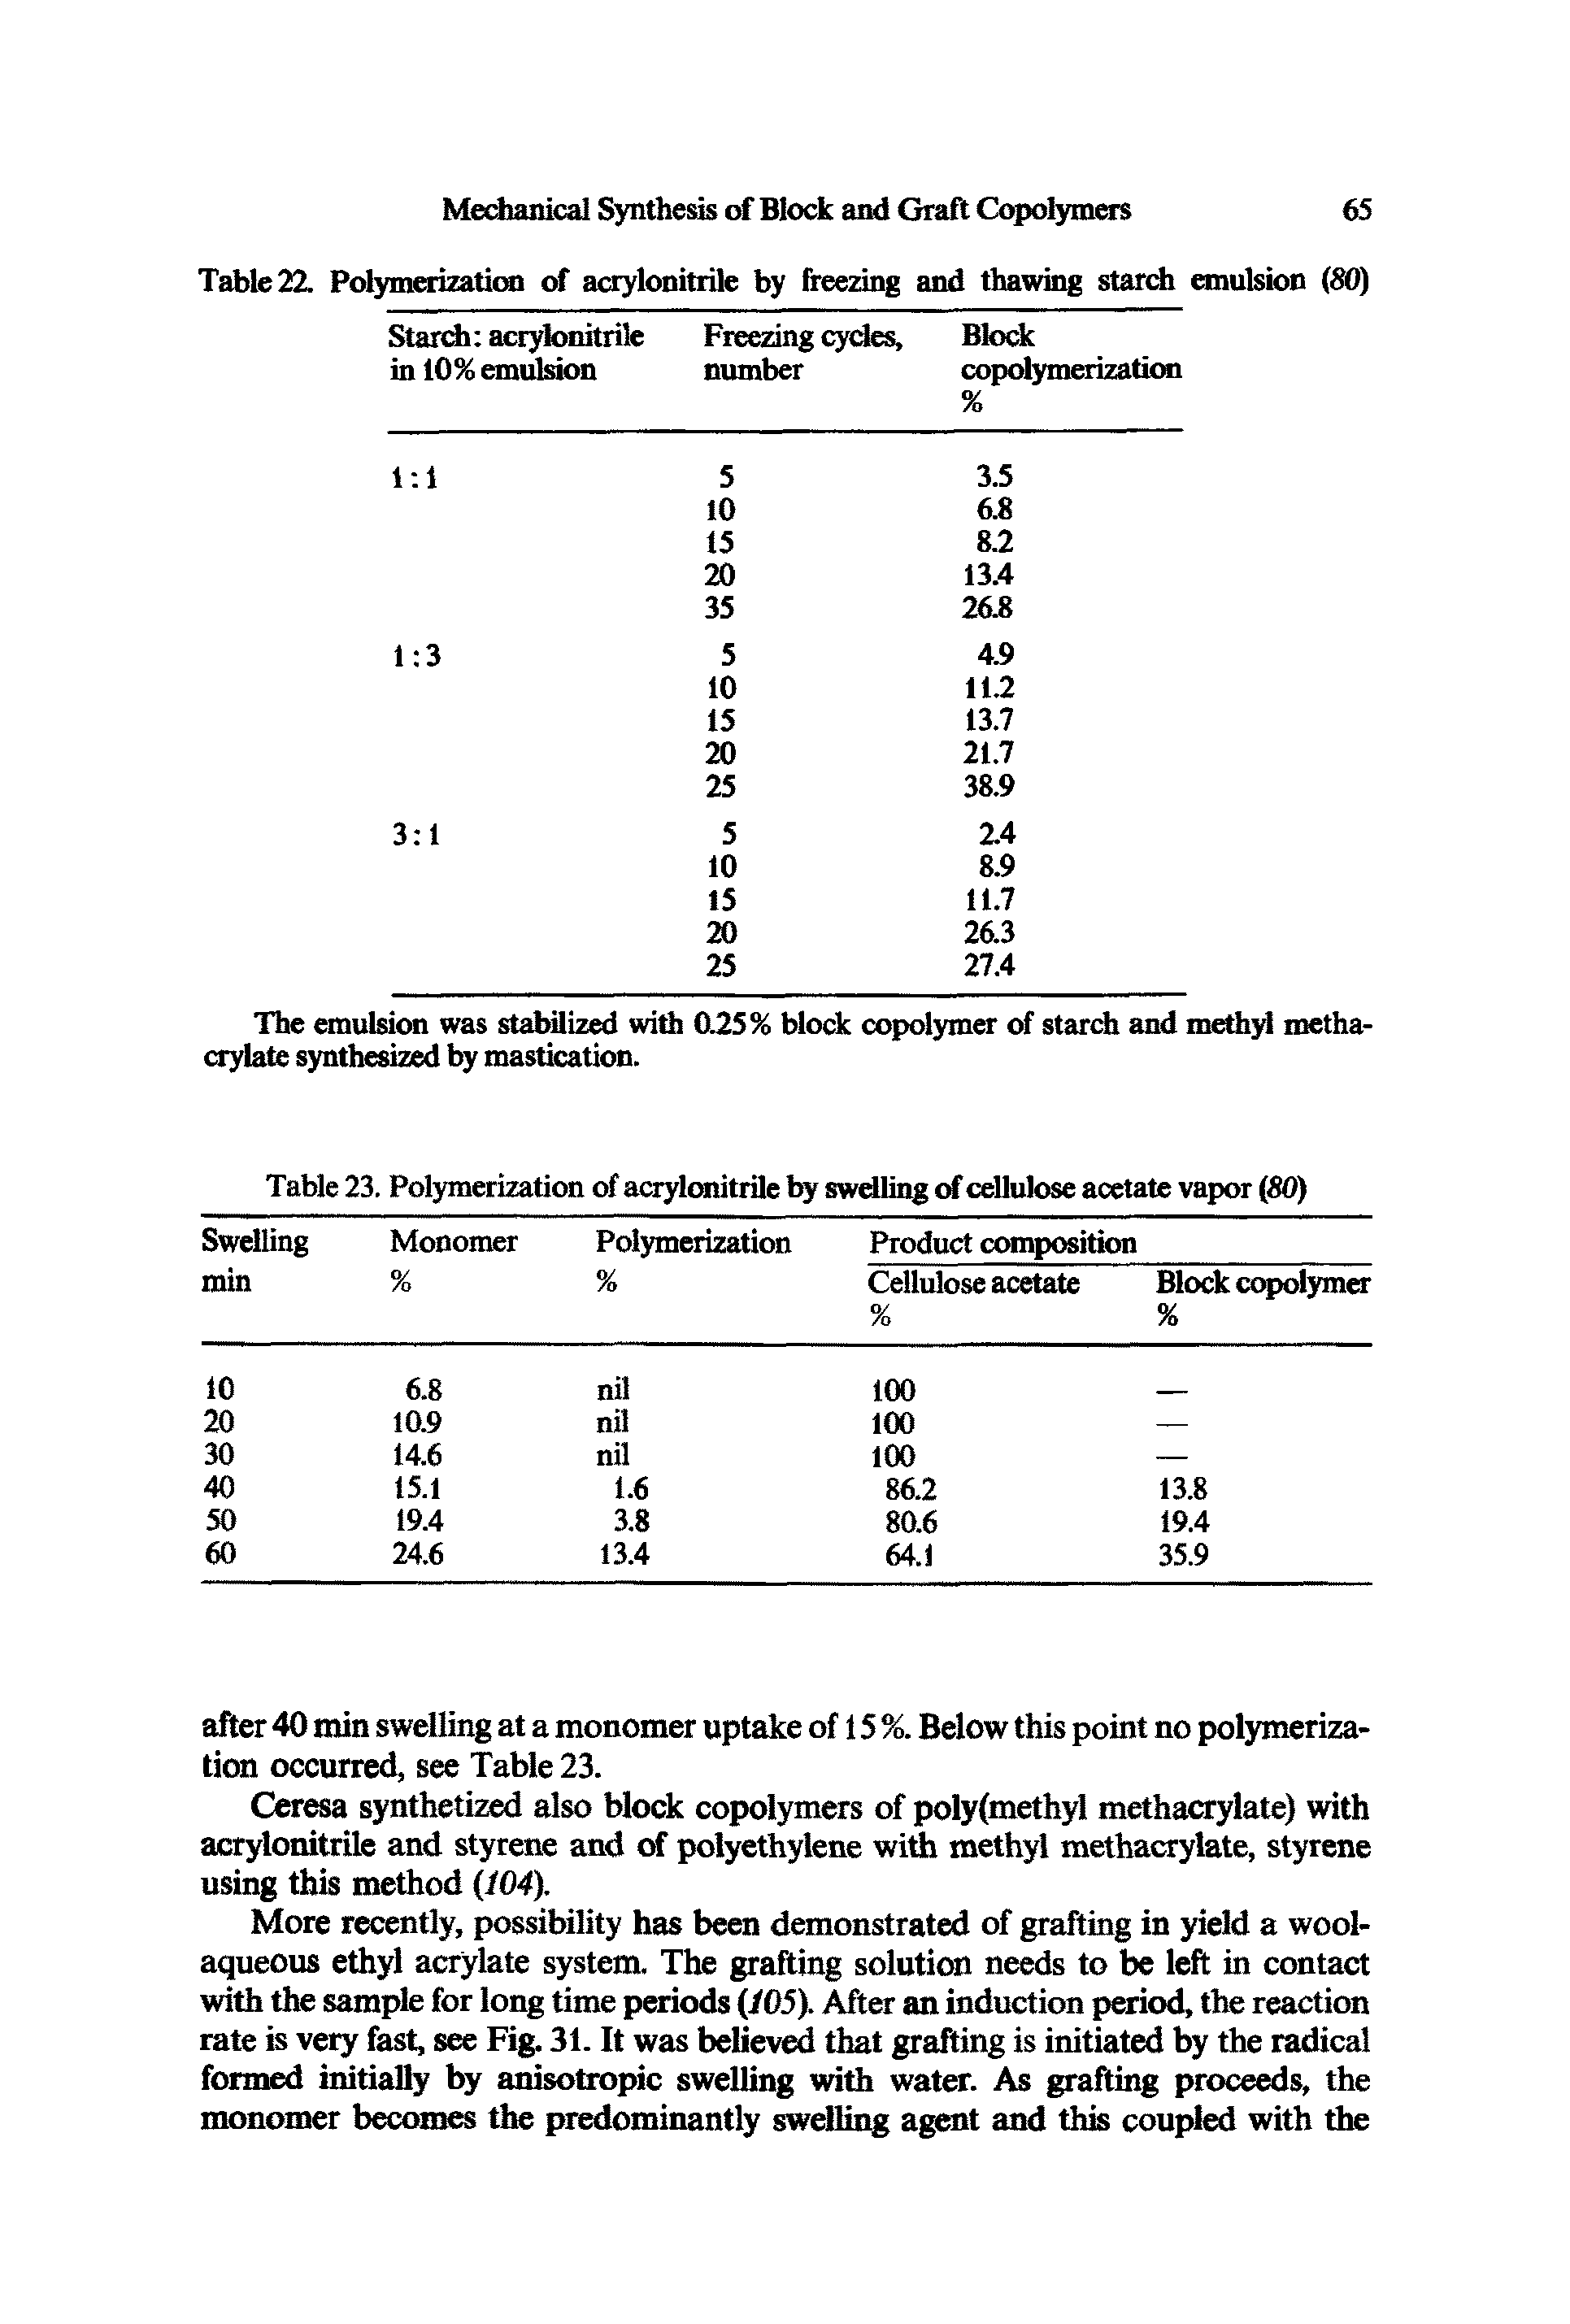 Table 23. Polymerization of acrylonitrile by swelling of cellulose acetate vapor (80)...